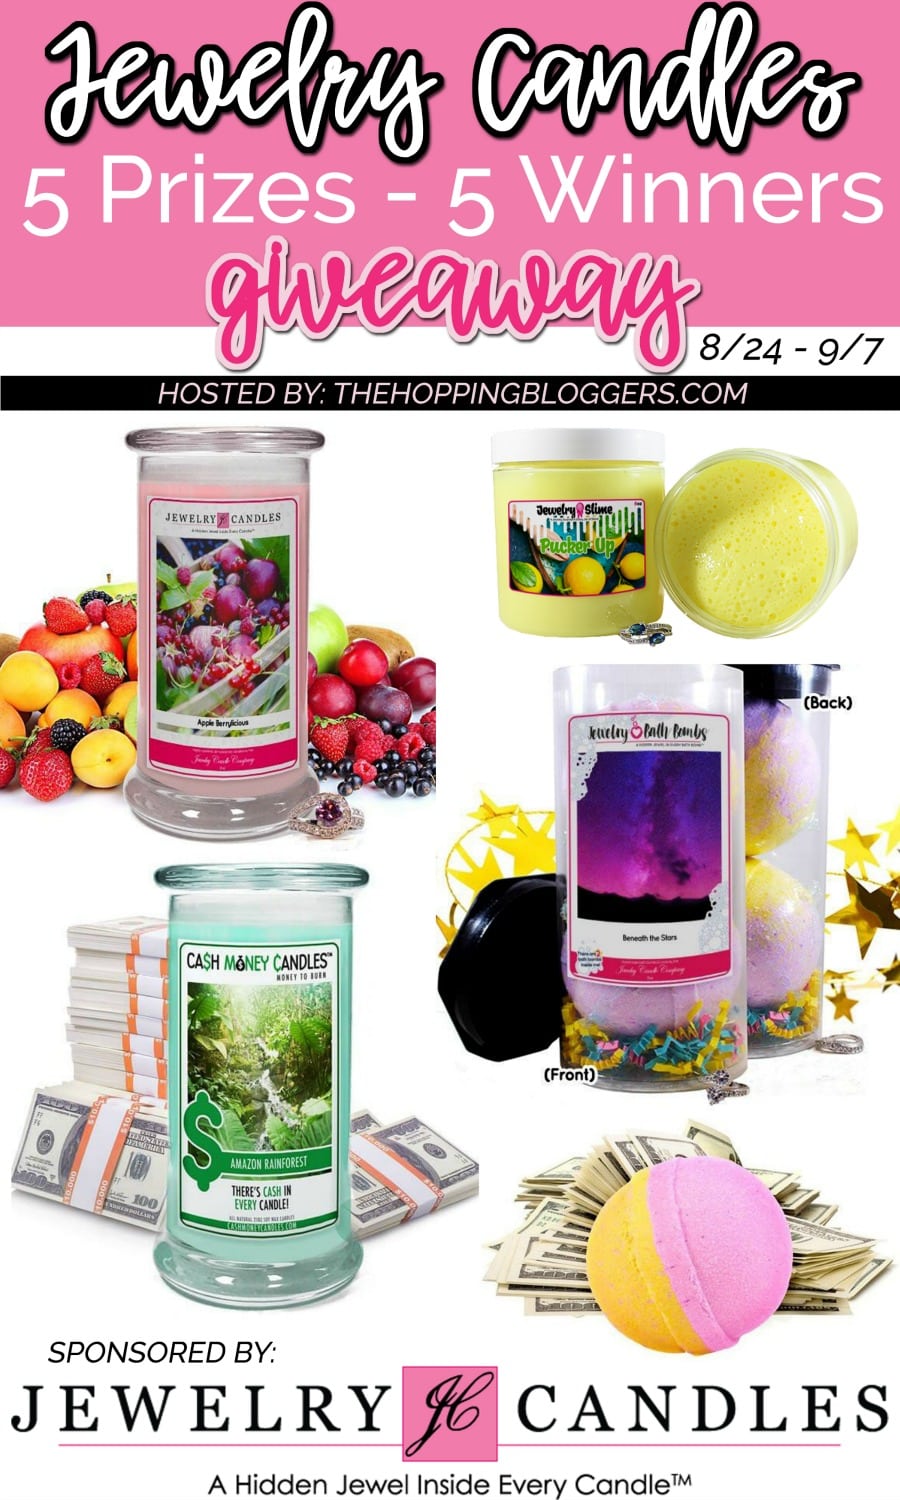 Jewelry Candles and Bath Bombs Giveaway - abccrreativelearning.com